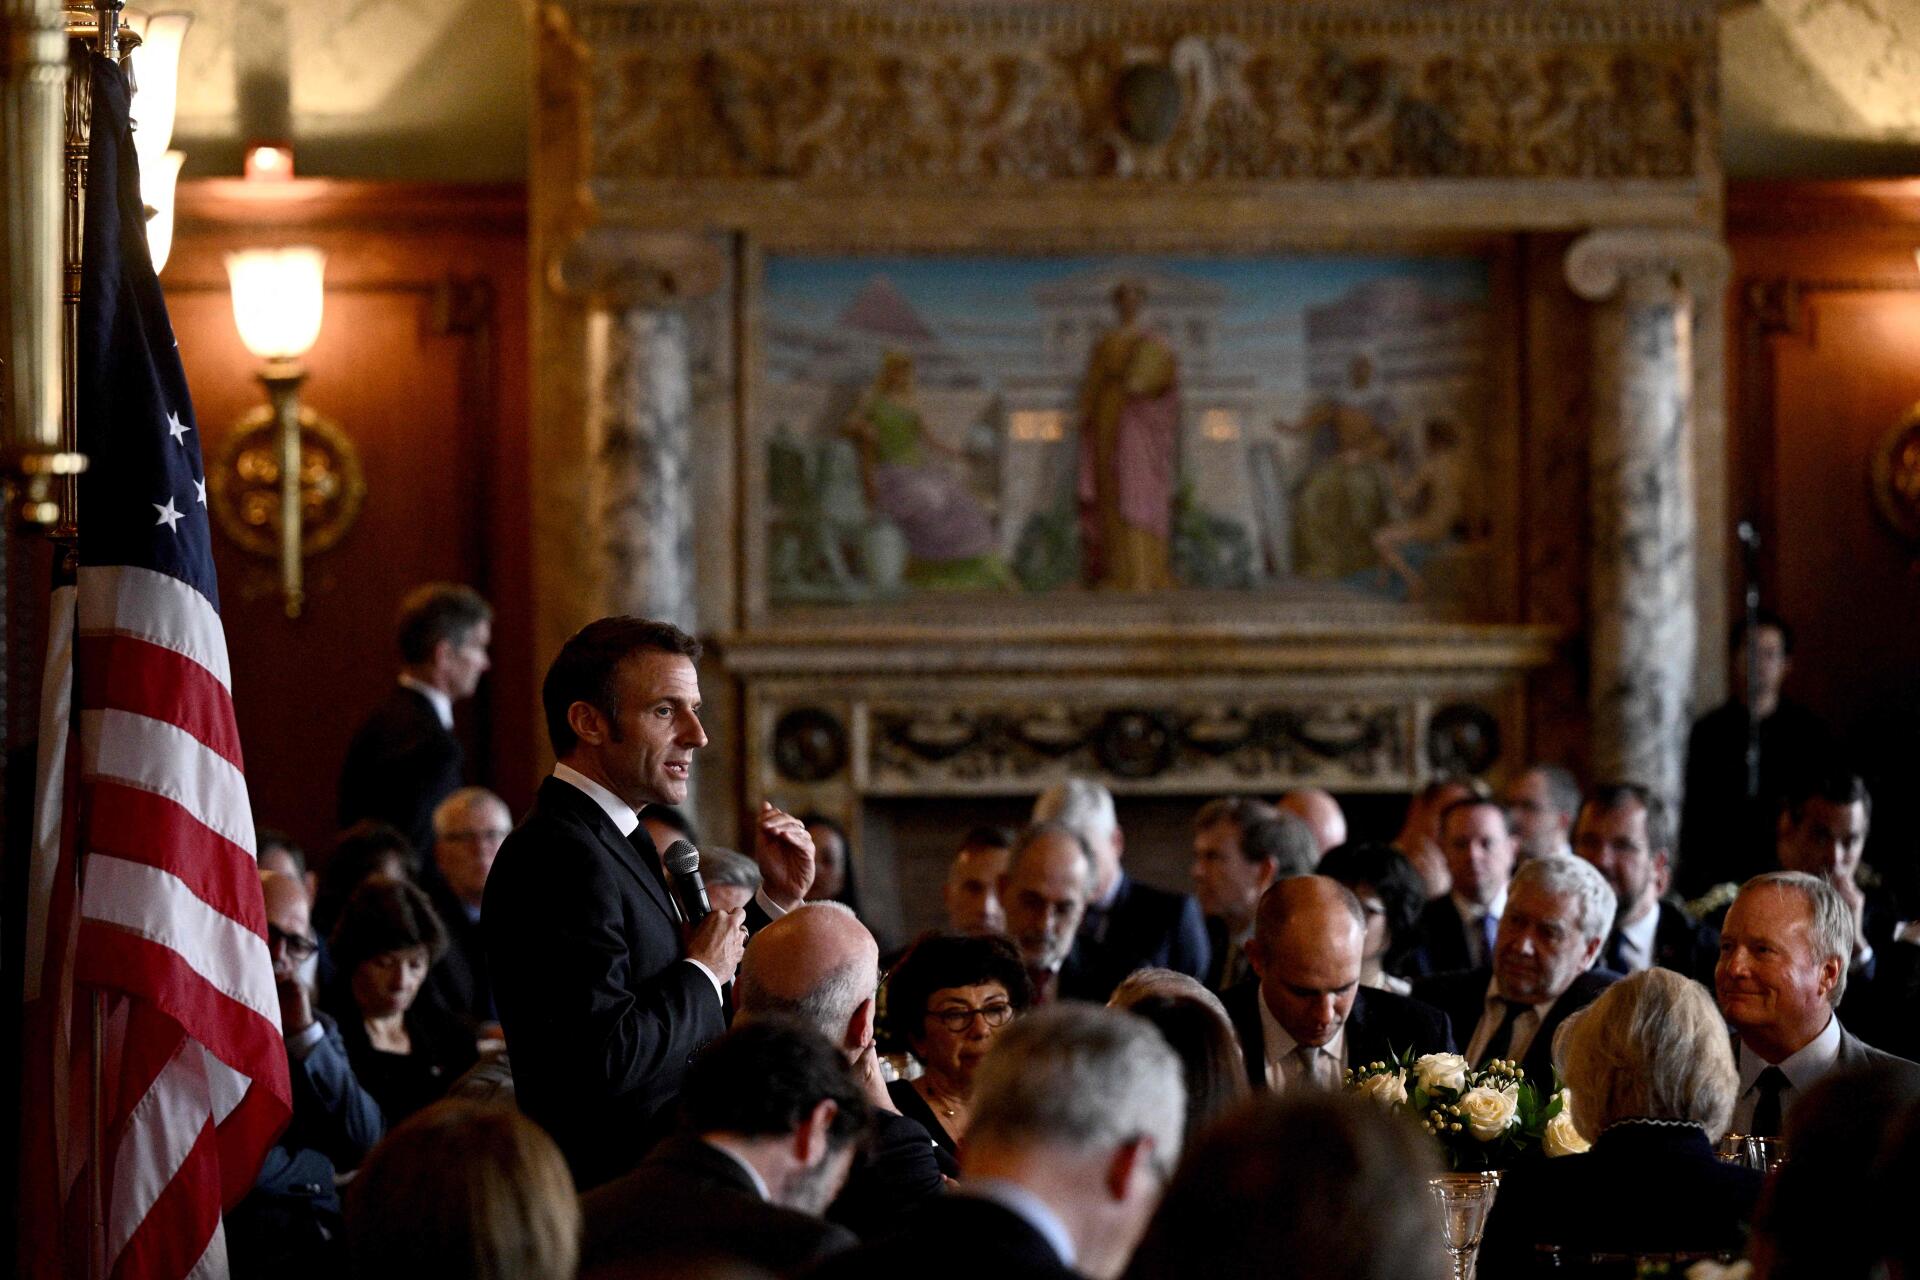 French President Emmanuel Macron speaks during a working lunch on climate and biodiversity issues with US Climate Envoy John Kerry, members of the United States Congress, and key US stakeholders on climate, at the US Capitol in Washington.